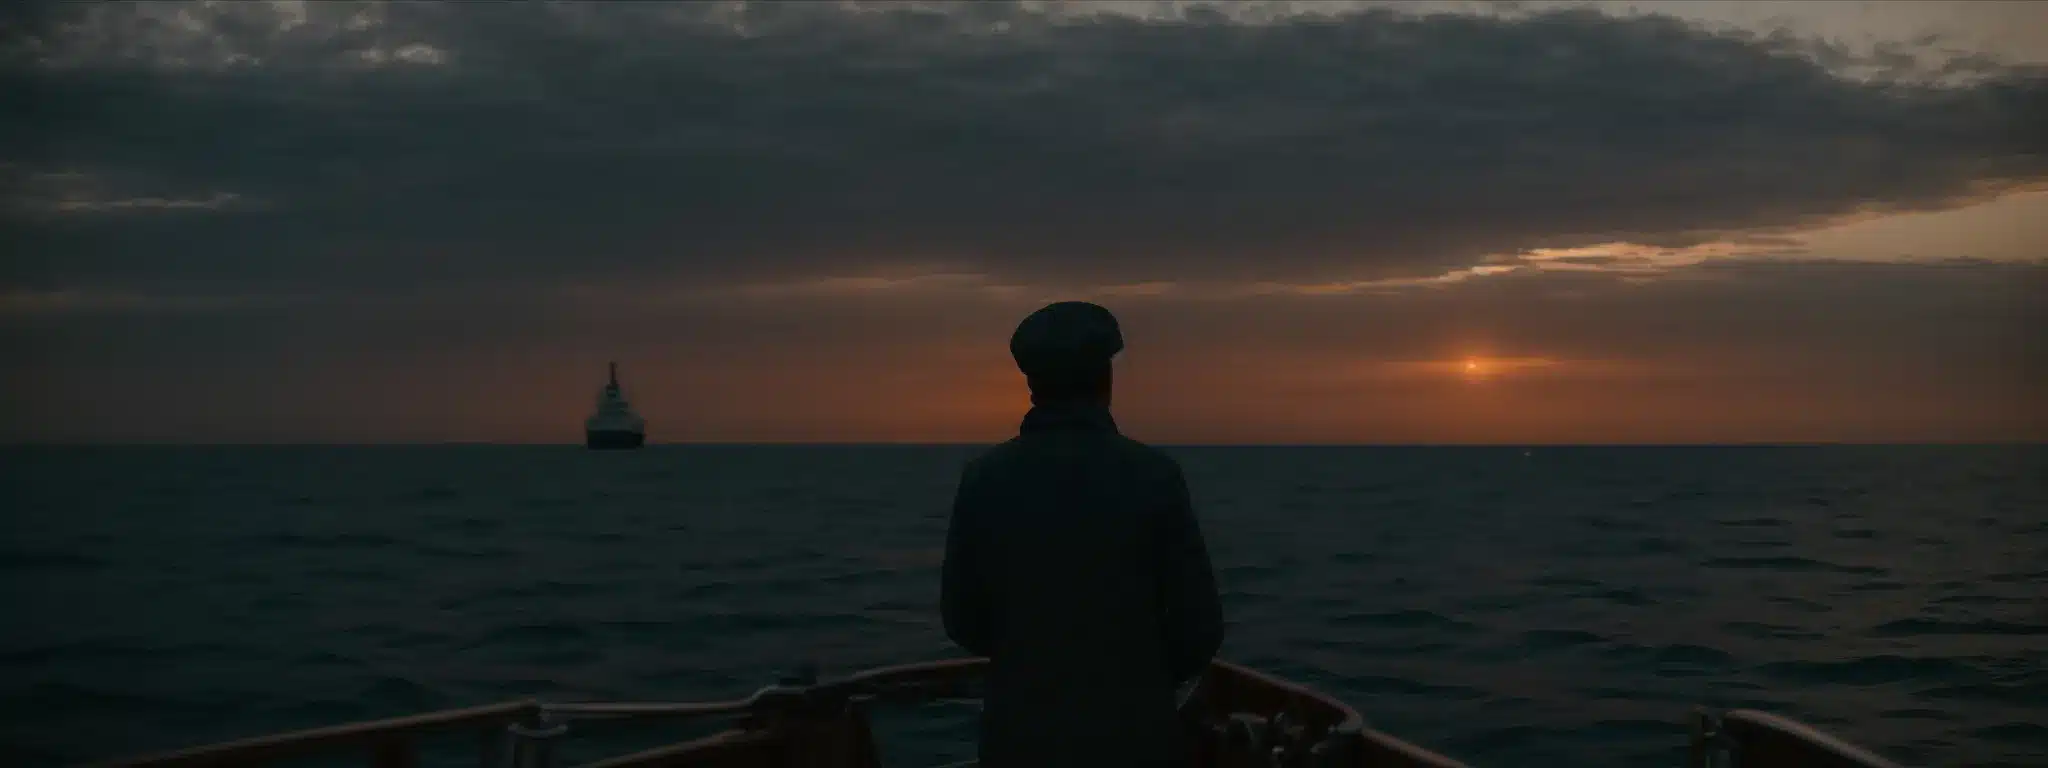 A Person Stands At The Helm Of A Ship, Gazing Out At The Horizon Where The Sun Sets Over A Calm Sea, Symbolizing The Strategic Journey Ahead.